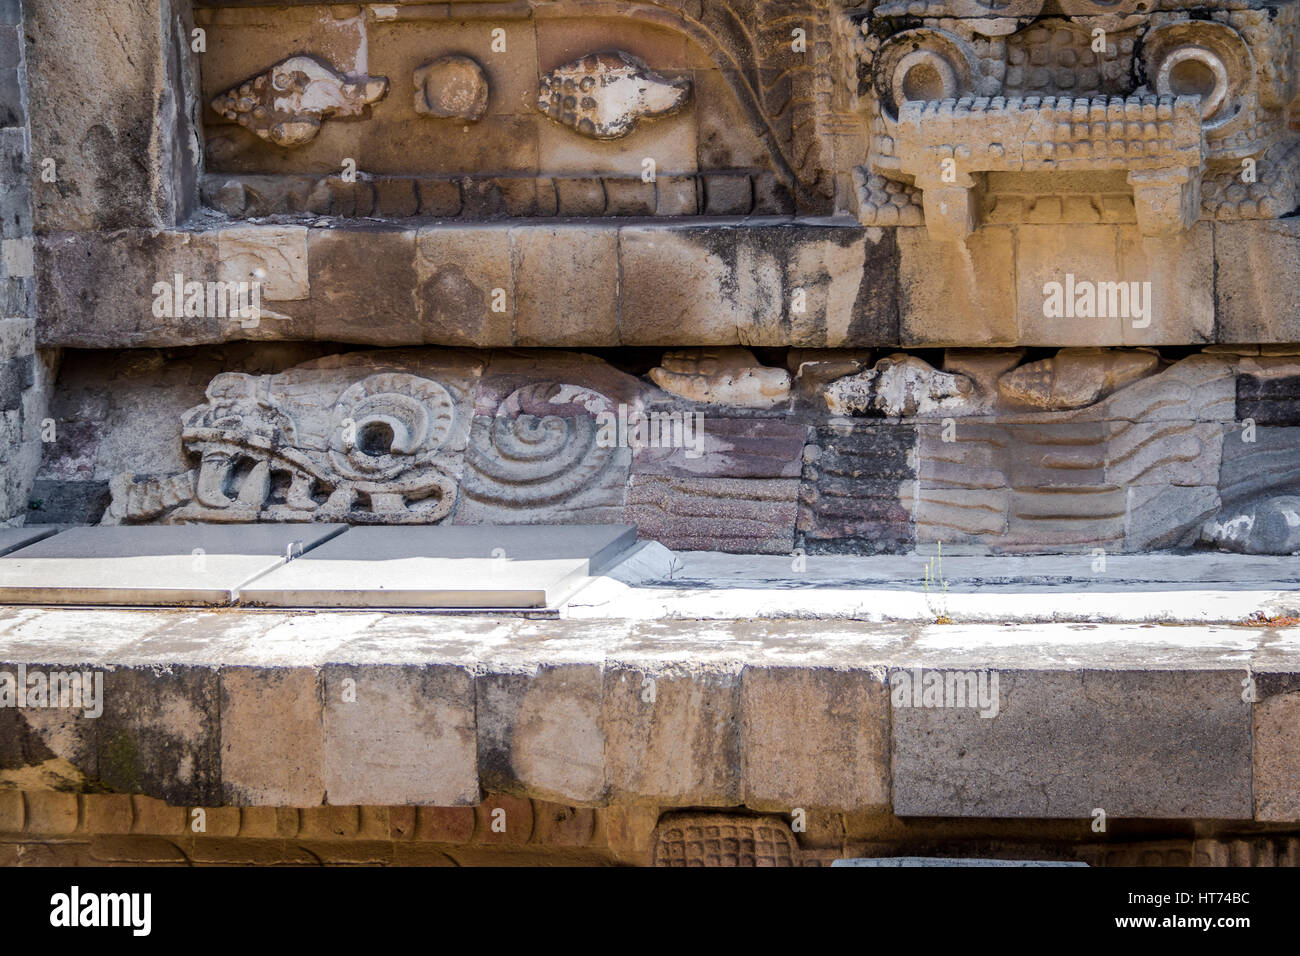 Carving details of Quetzalcoatl Pyramid at Teotihuacan Ruins - Mexico City, Mexico Stock Photo